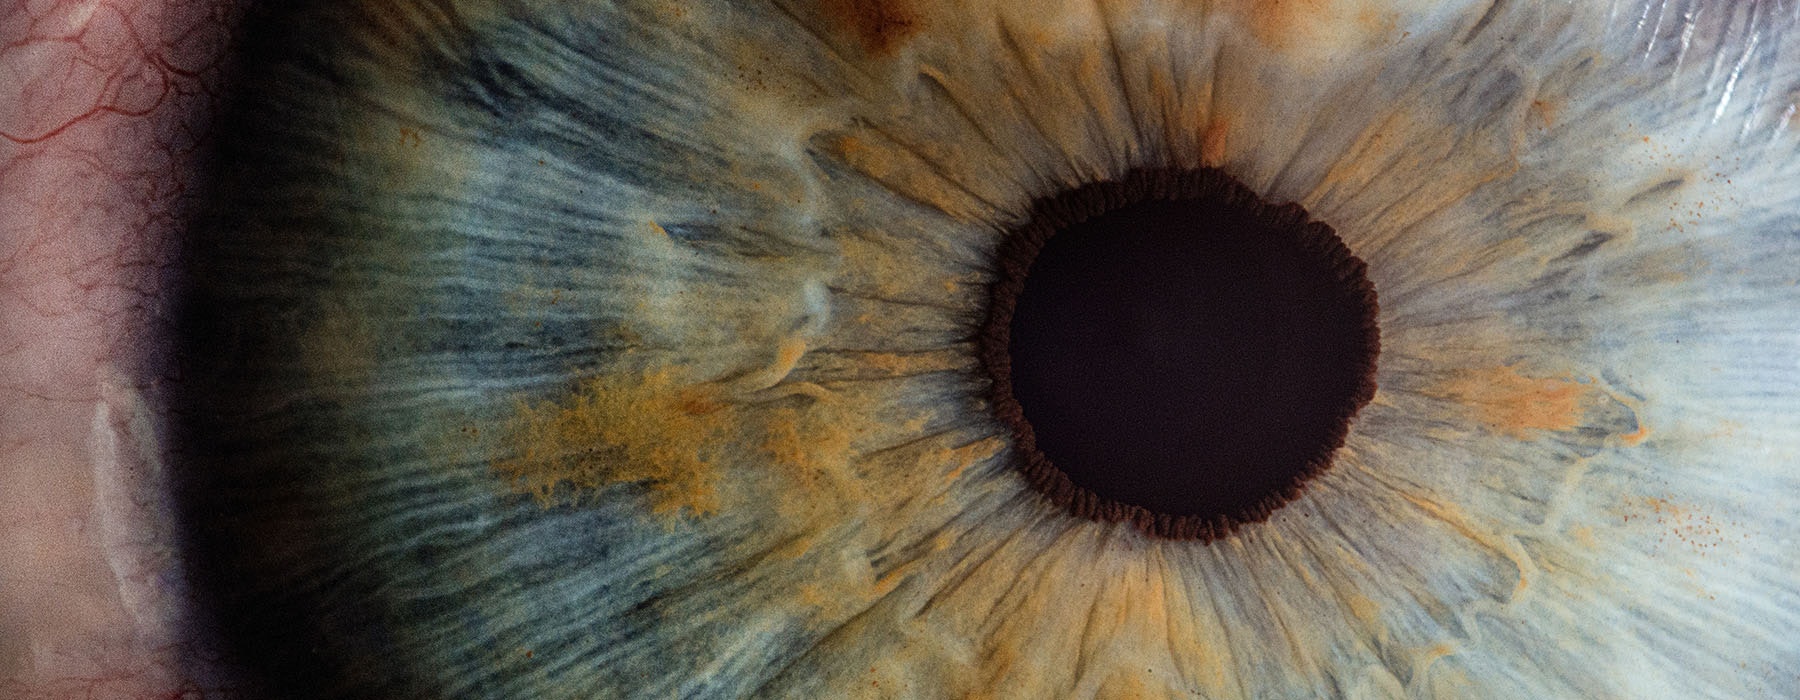 An extreme close-up of someone’s eyeball